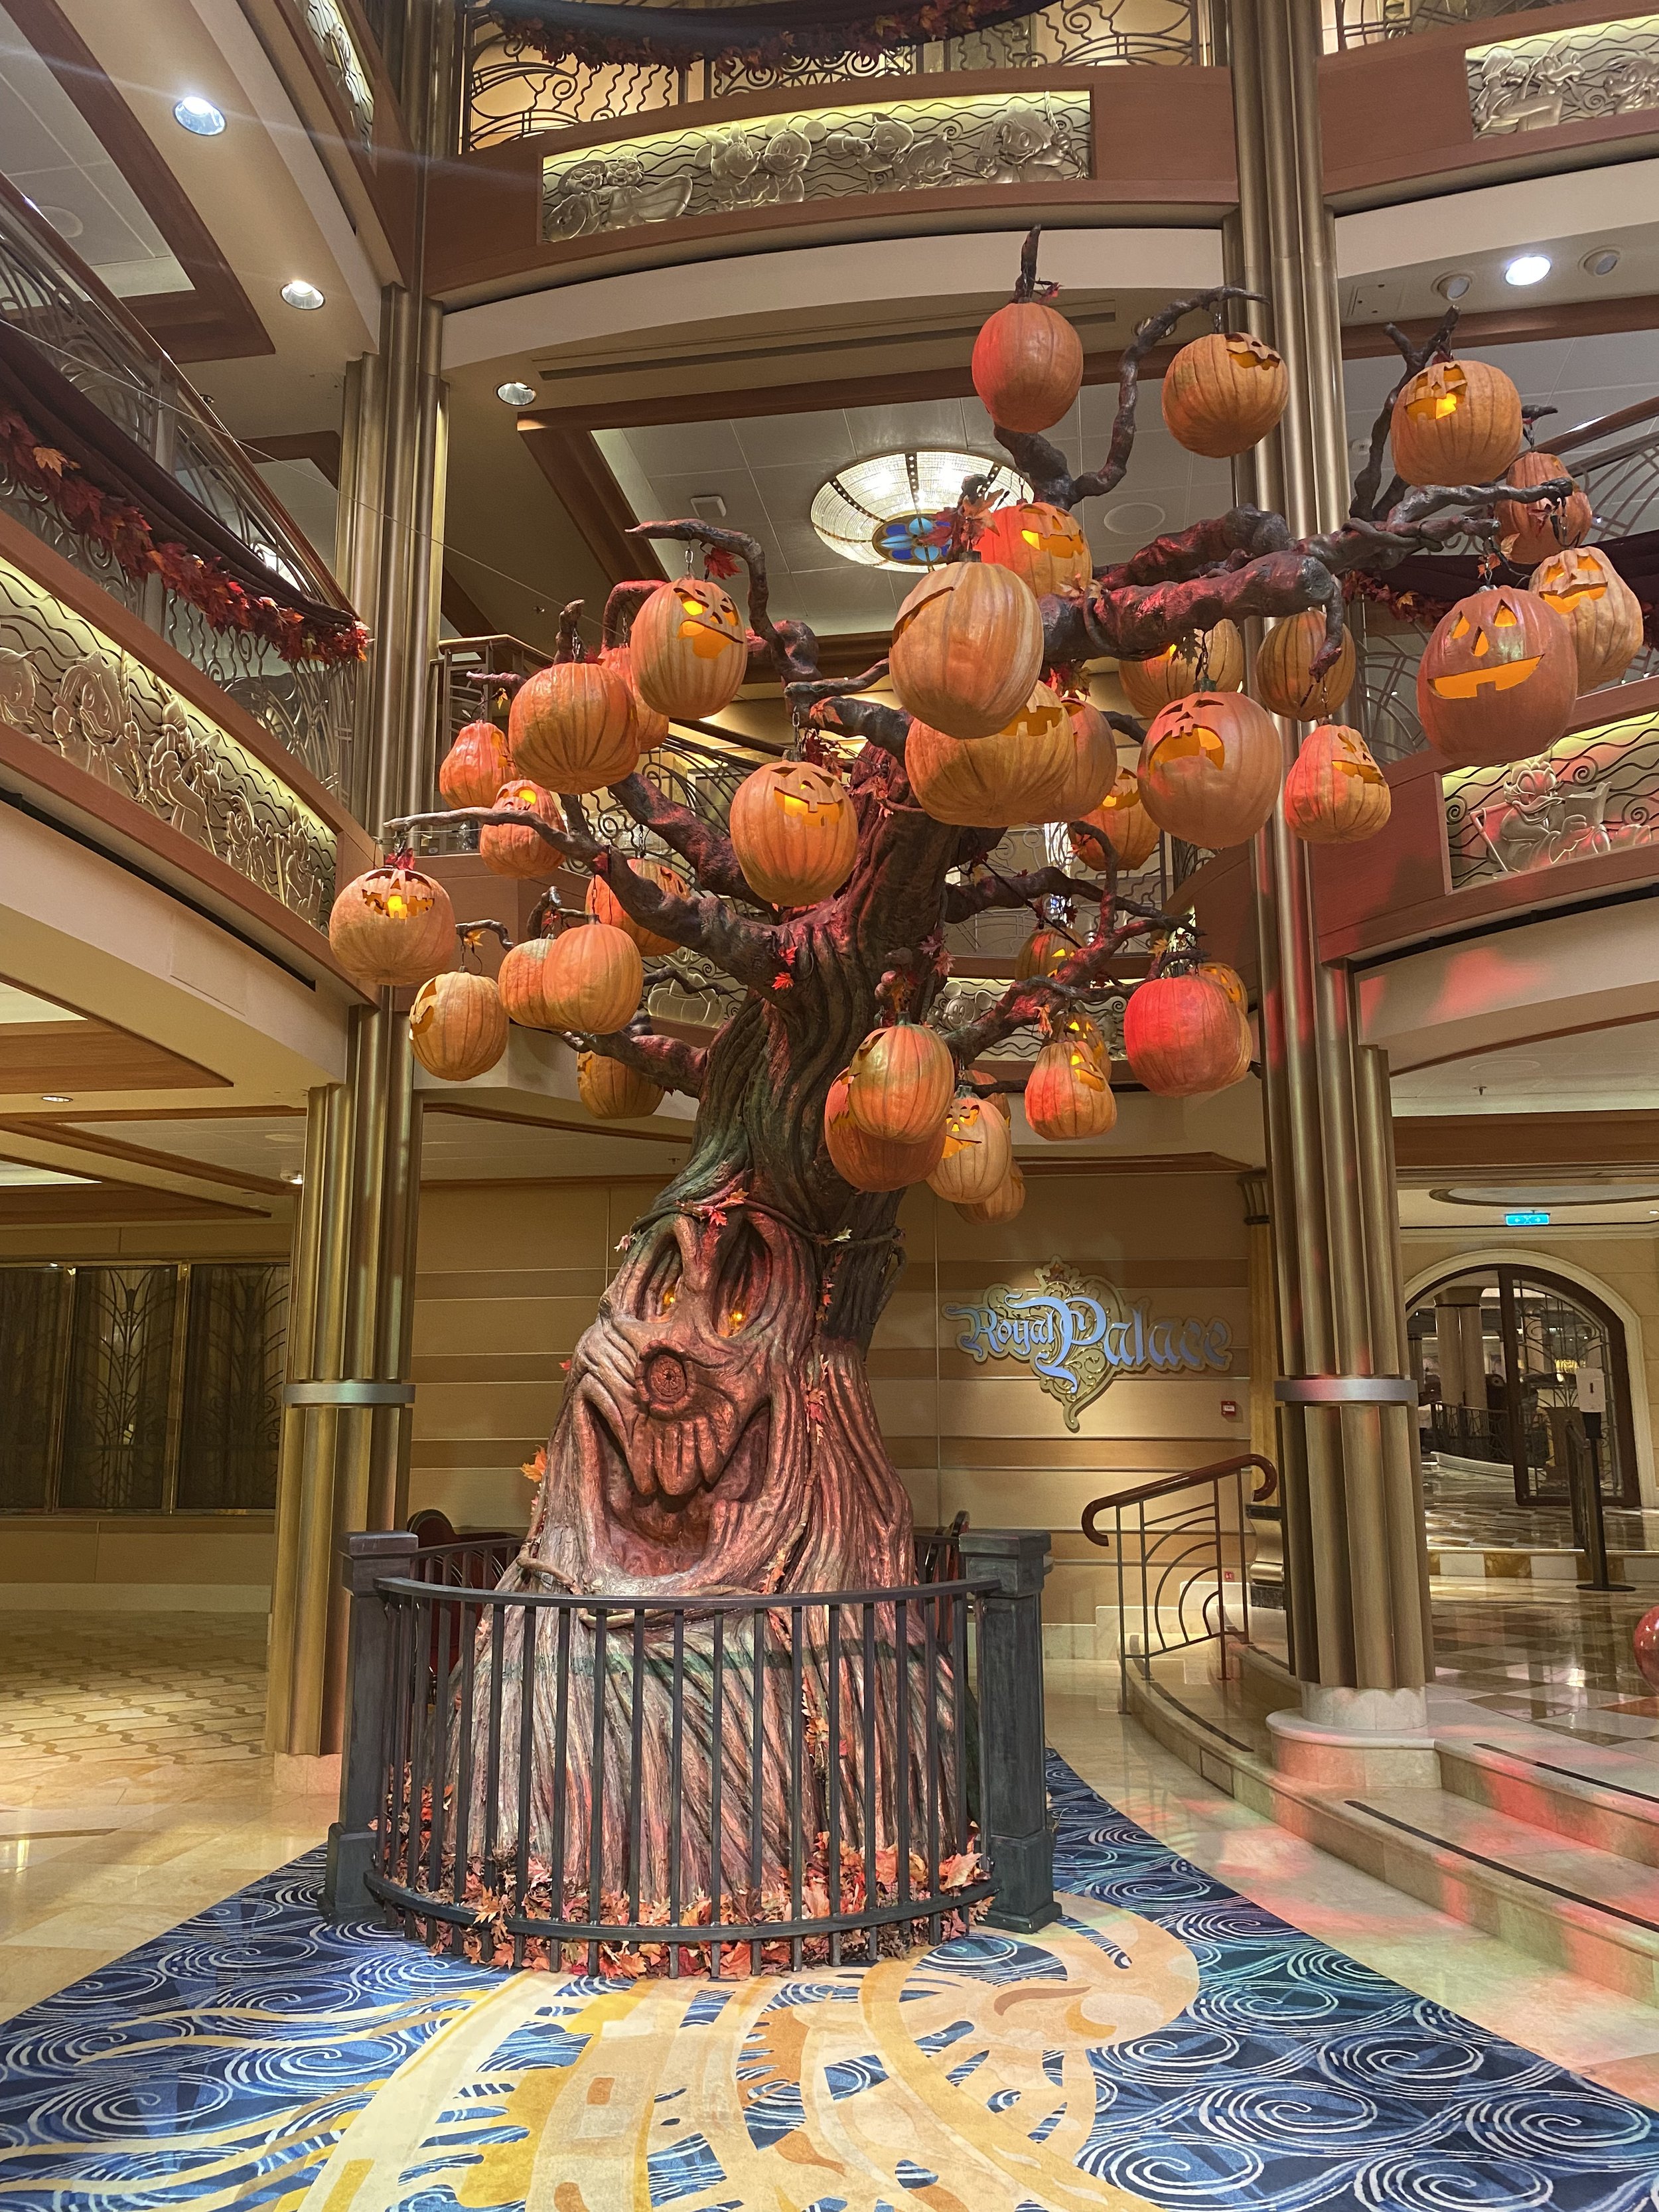  Our cruise was in October so the ship was decorated for Halloween on the High Seas. Some of the activities were scaled back to avoid large crowds from gathering.     October is a great time to cruise and cruise fares are a lot less compared to those